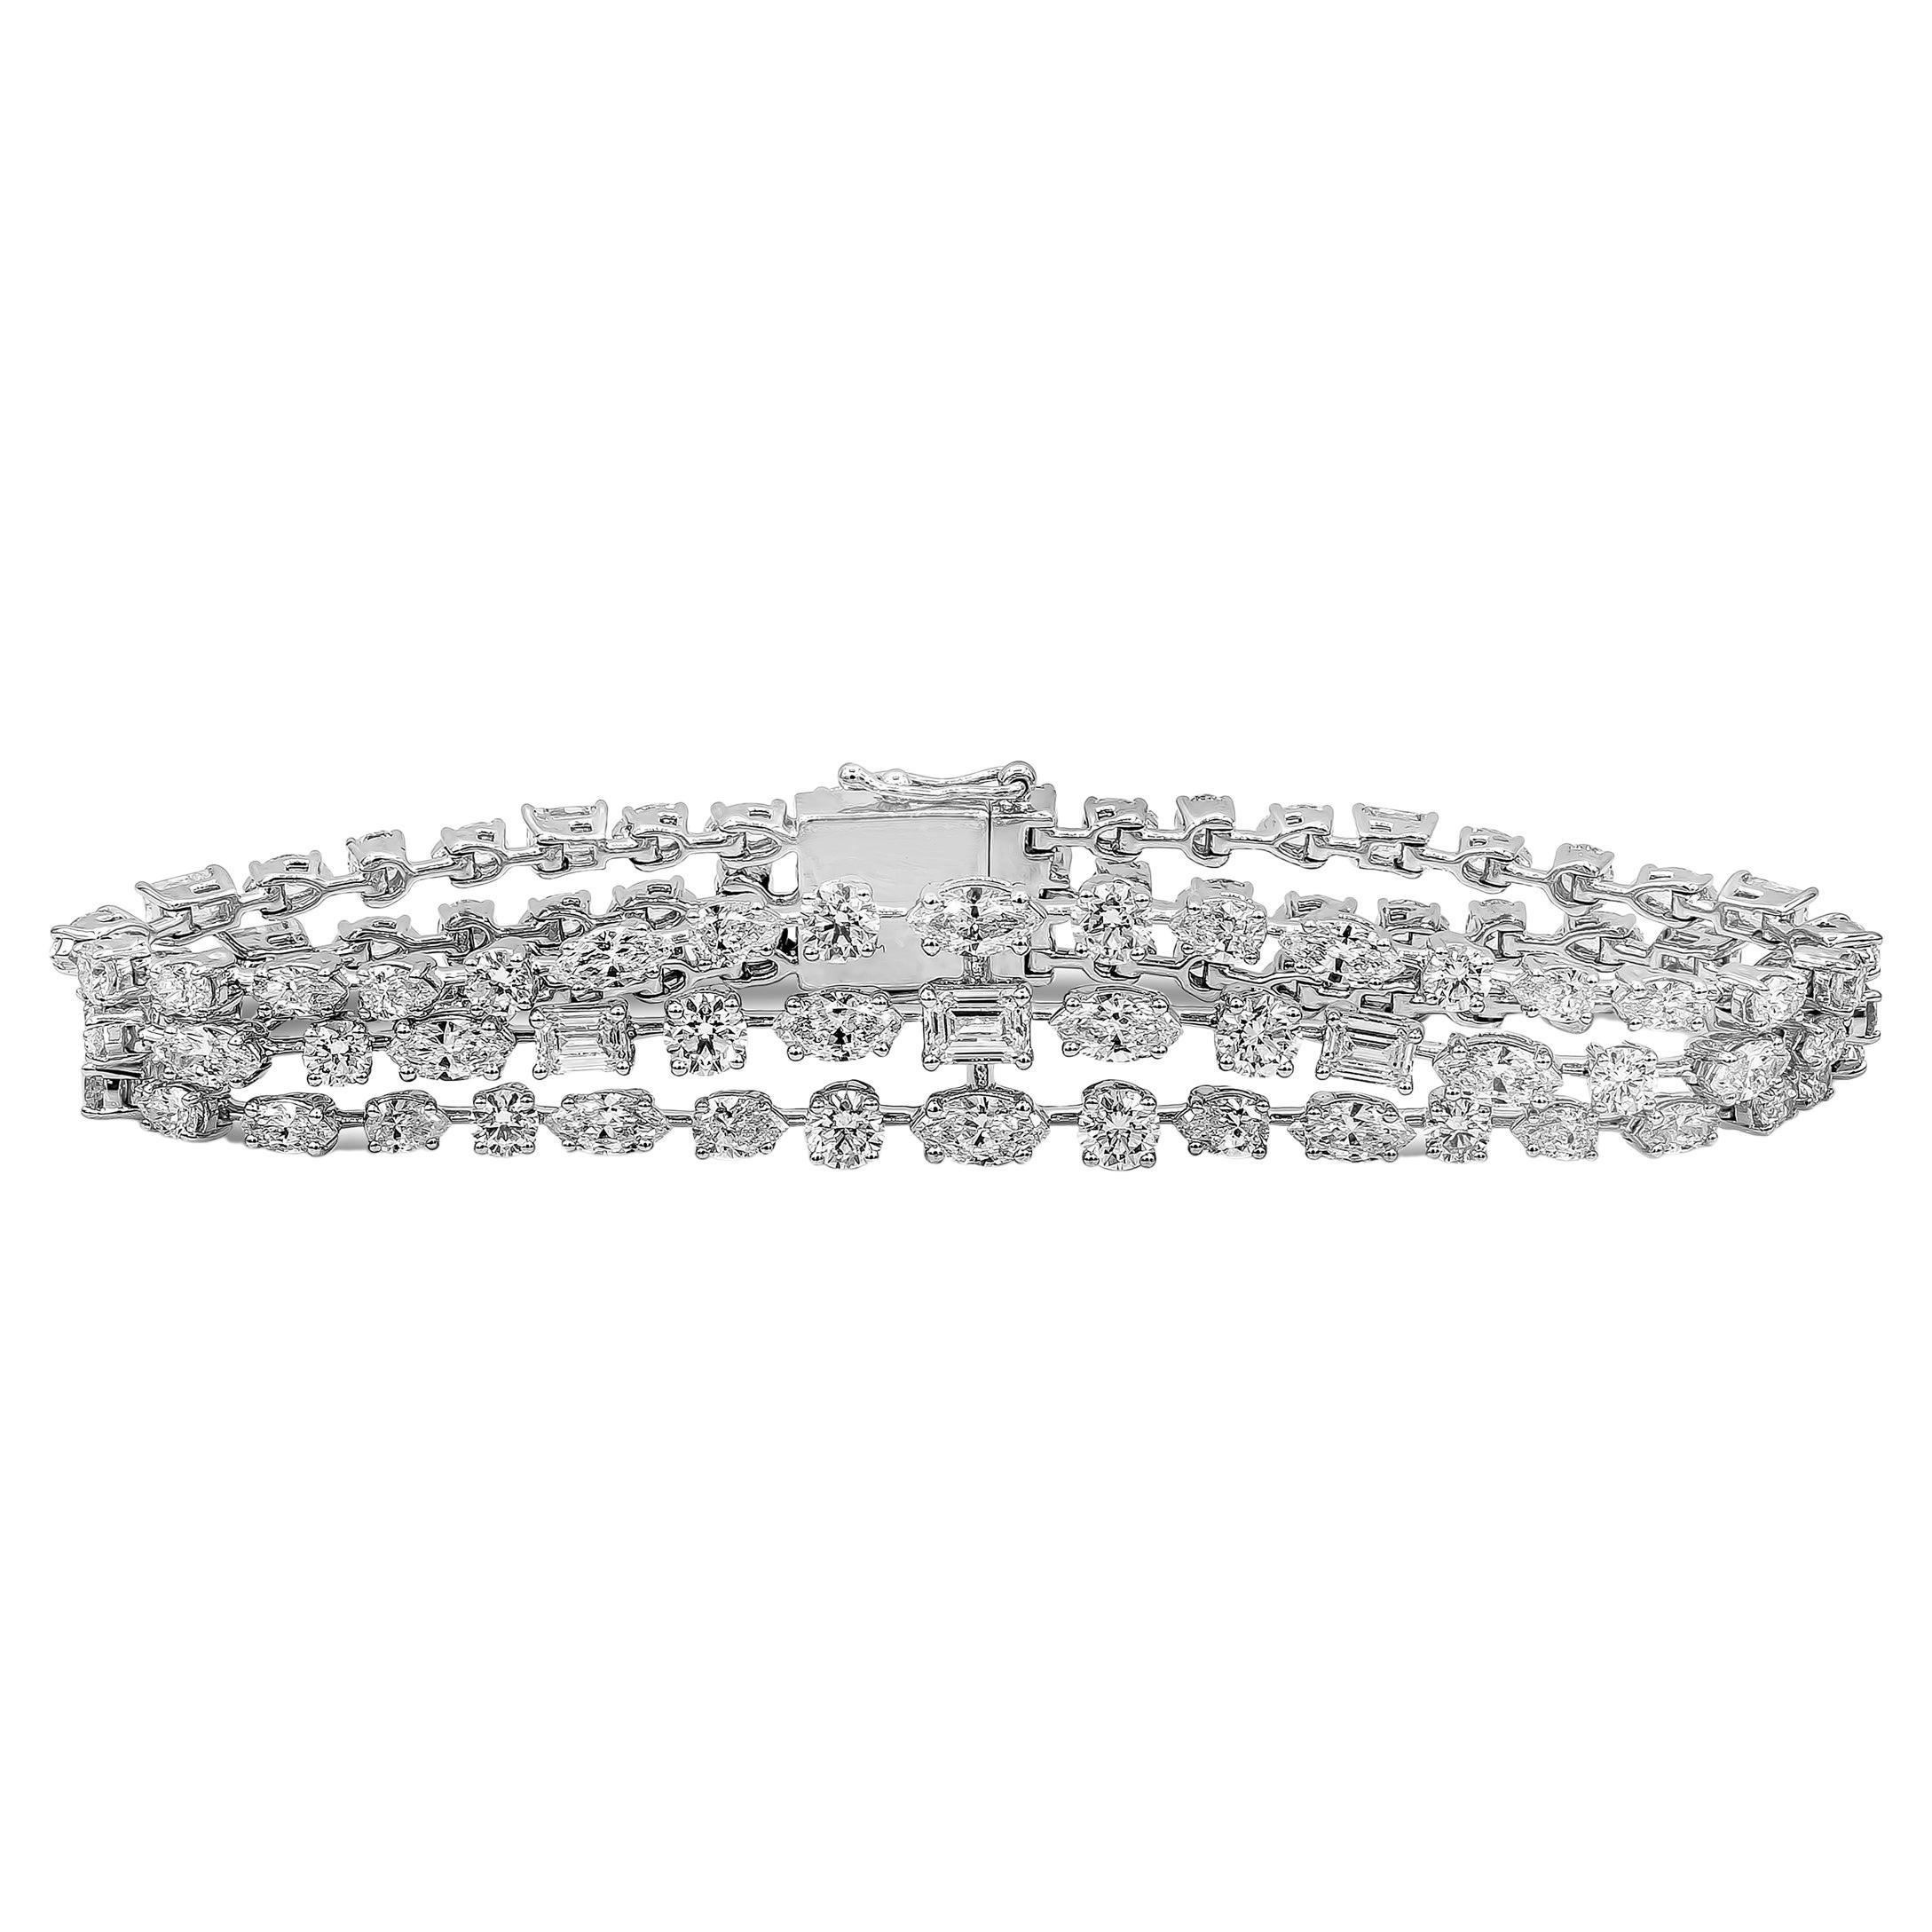 This elegant and fashionable bracelet showcasing three-rows of mix cut diamonds that graduate larger as it gets to the center. Diamonds weigh 12.03 carats total, G-H color and VS-SI in clarity. Made with 18K White Gold.

Roman Malakov is a custom